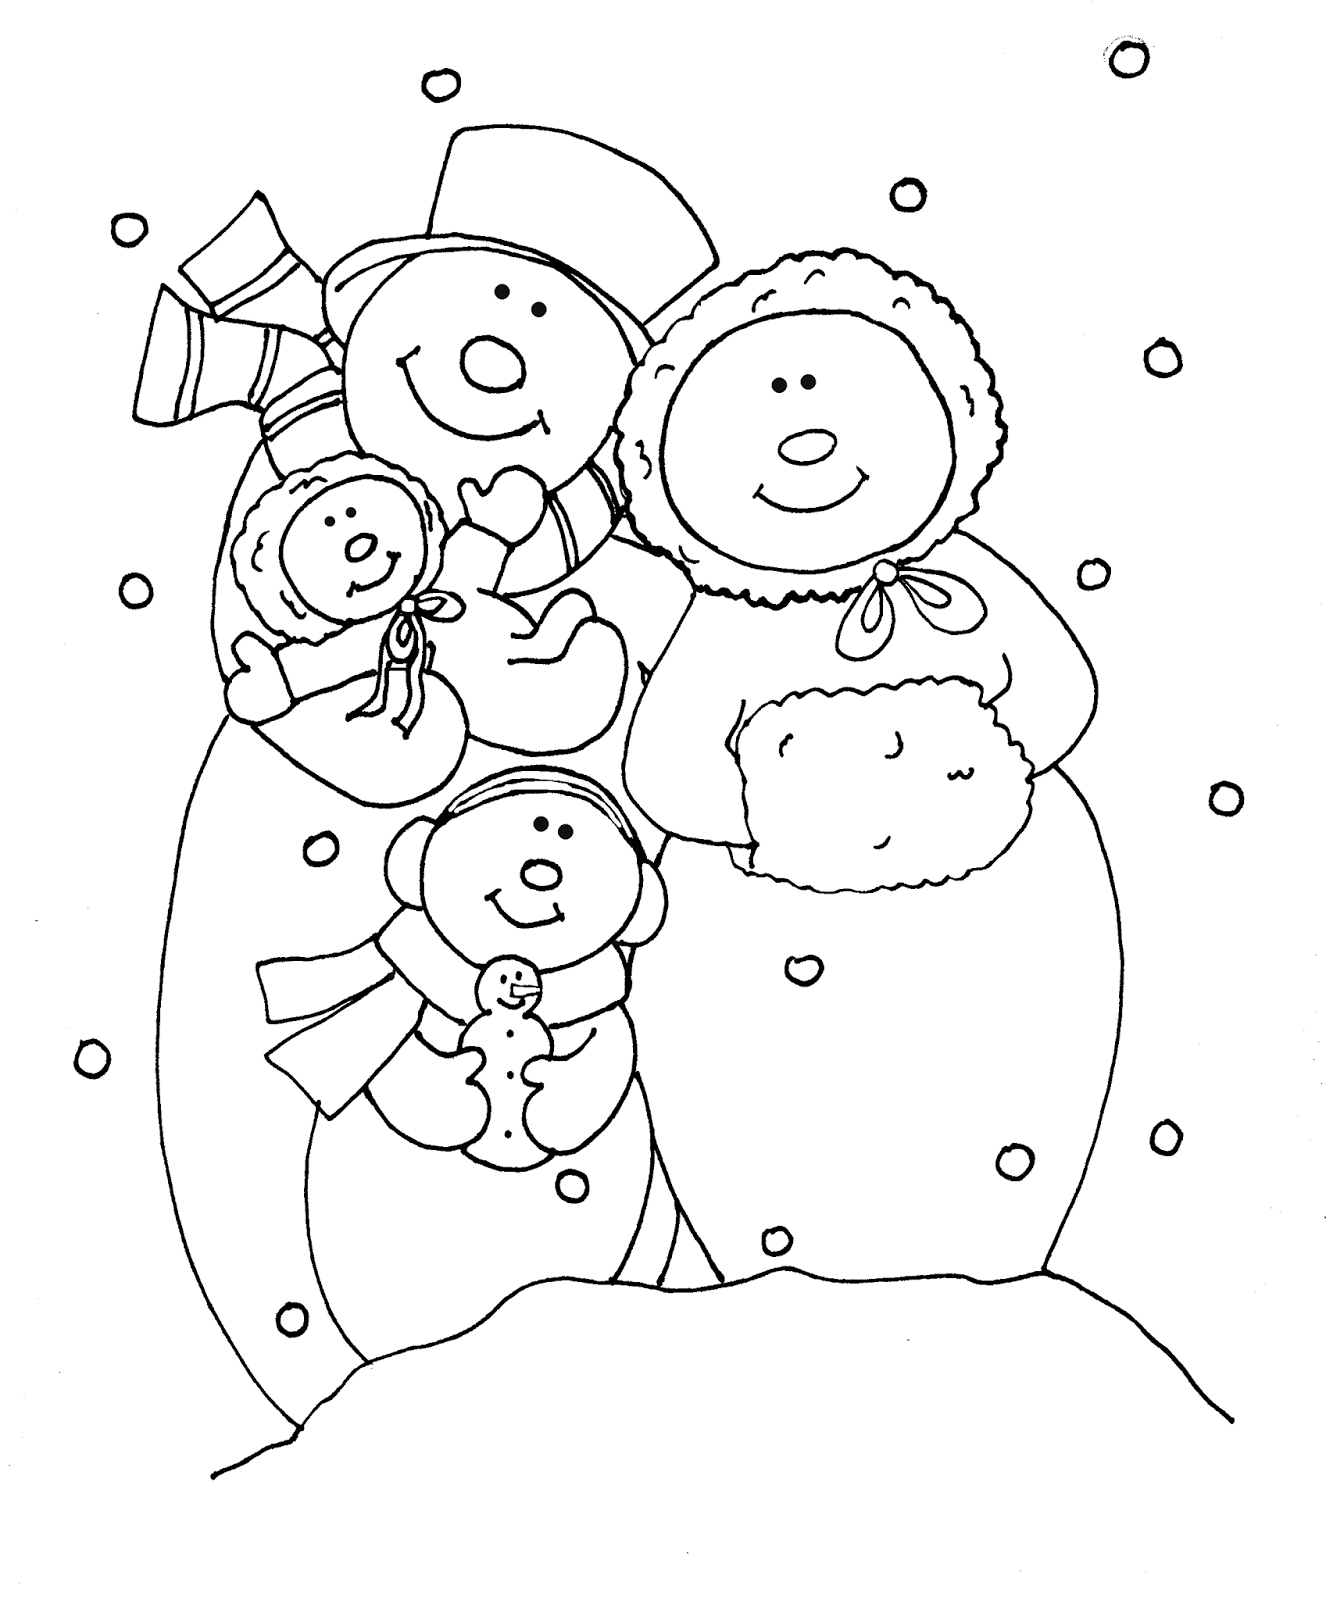 Download Free Dearie Dolls Digi Stamps: Snowman Family